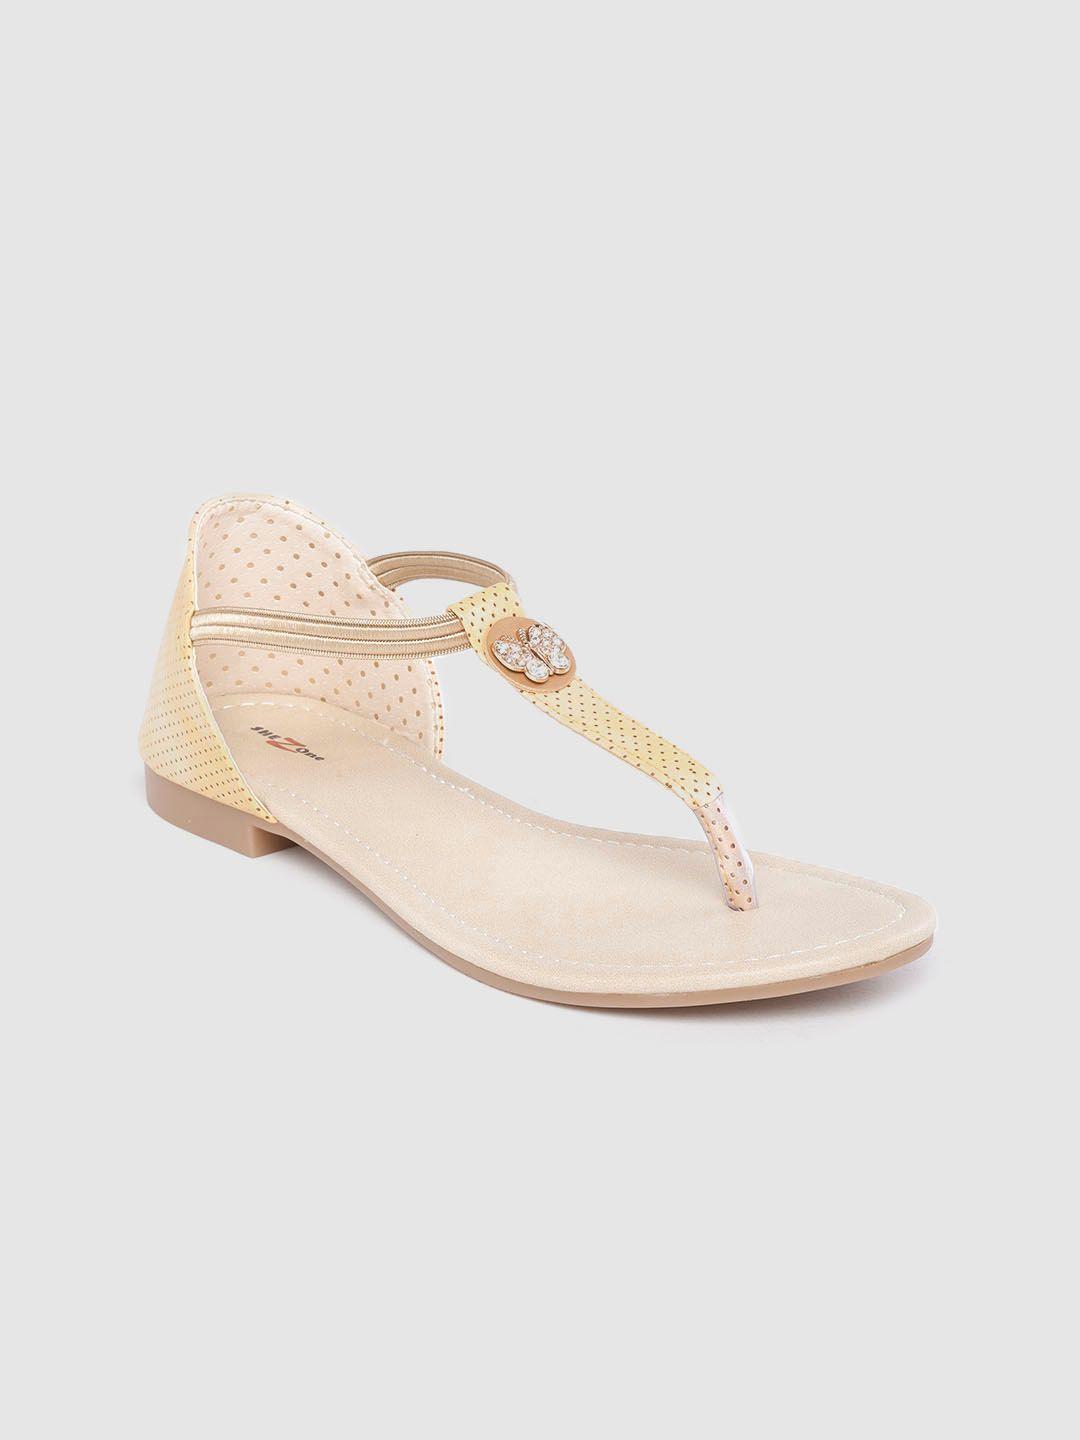 shezone women cream-coloured perforated t-strap flats